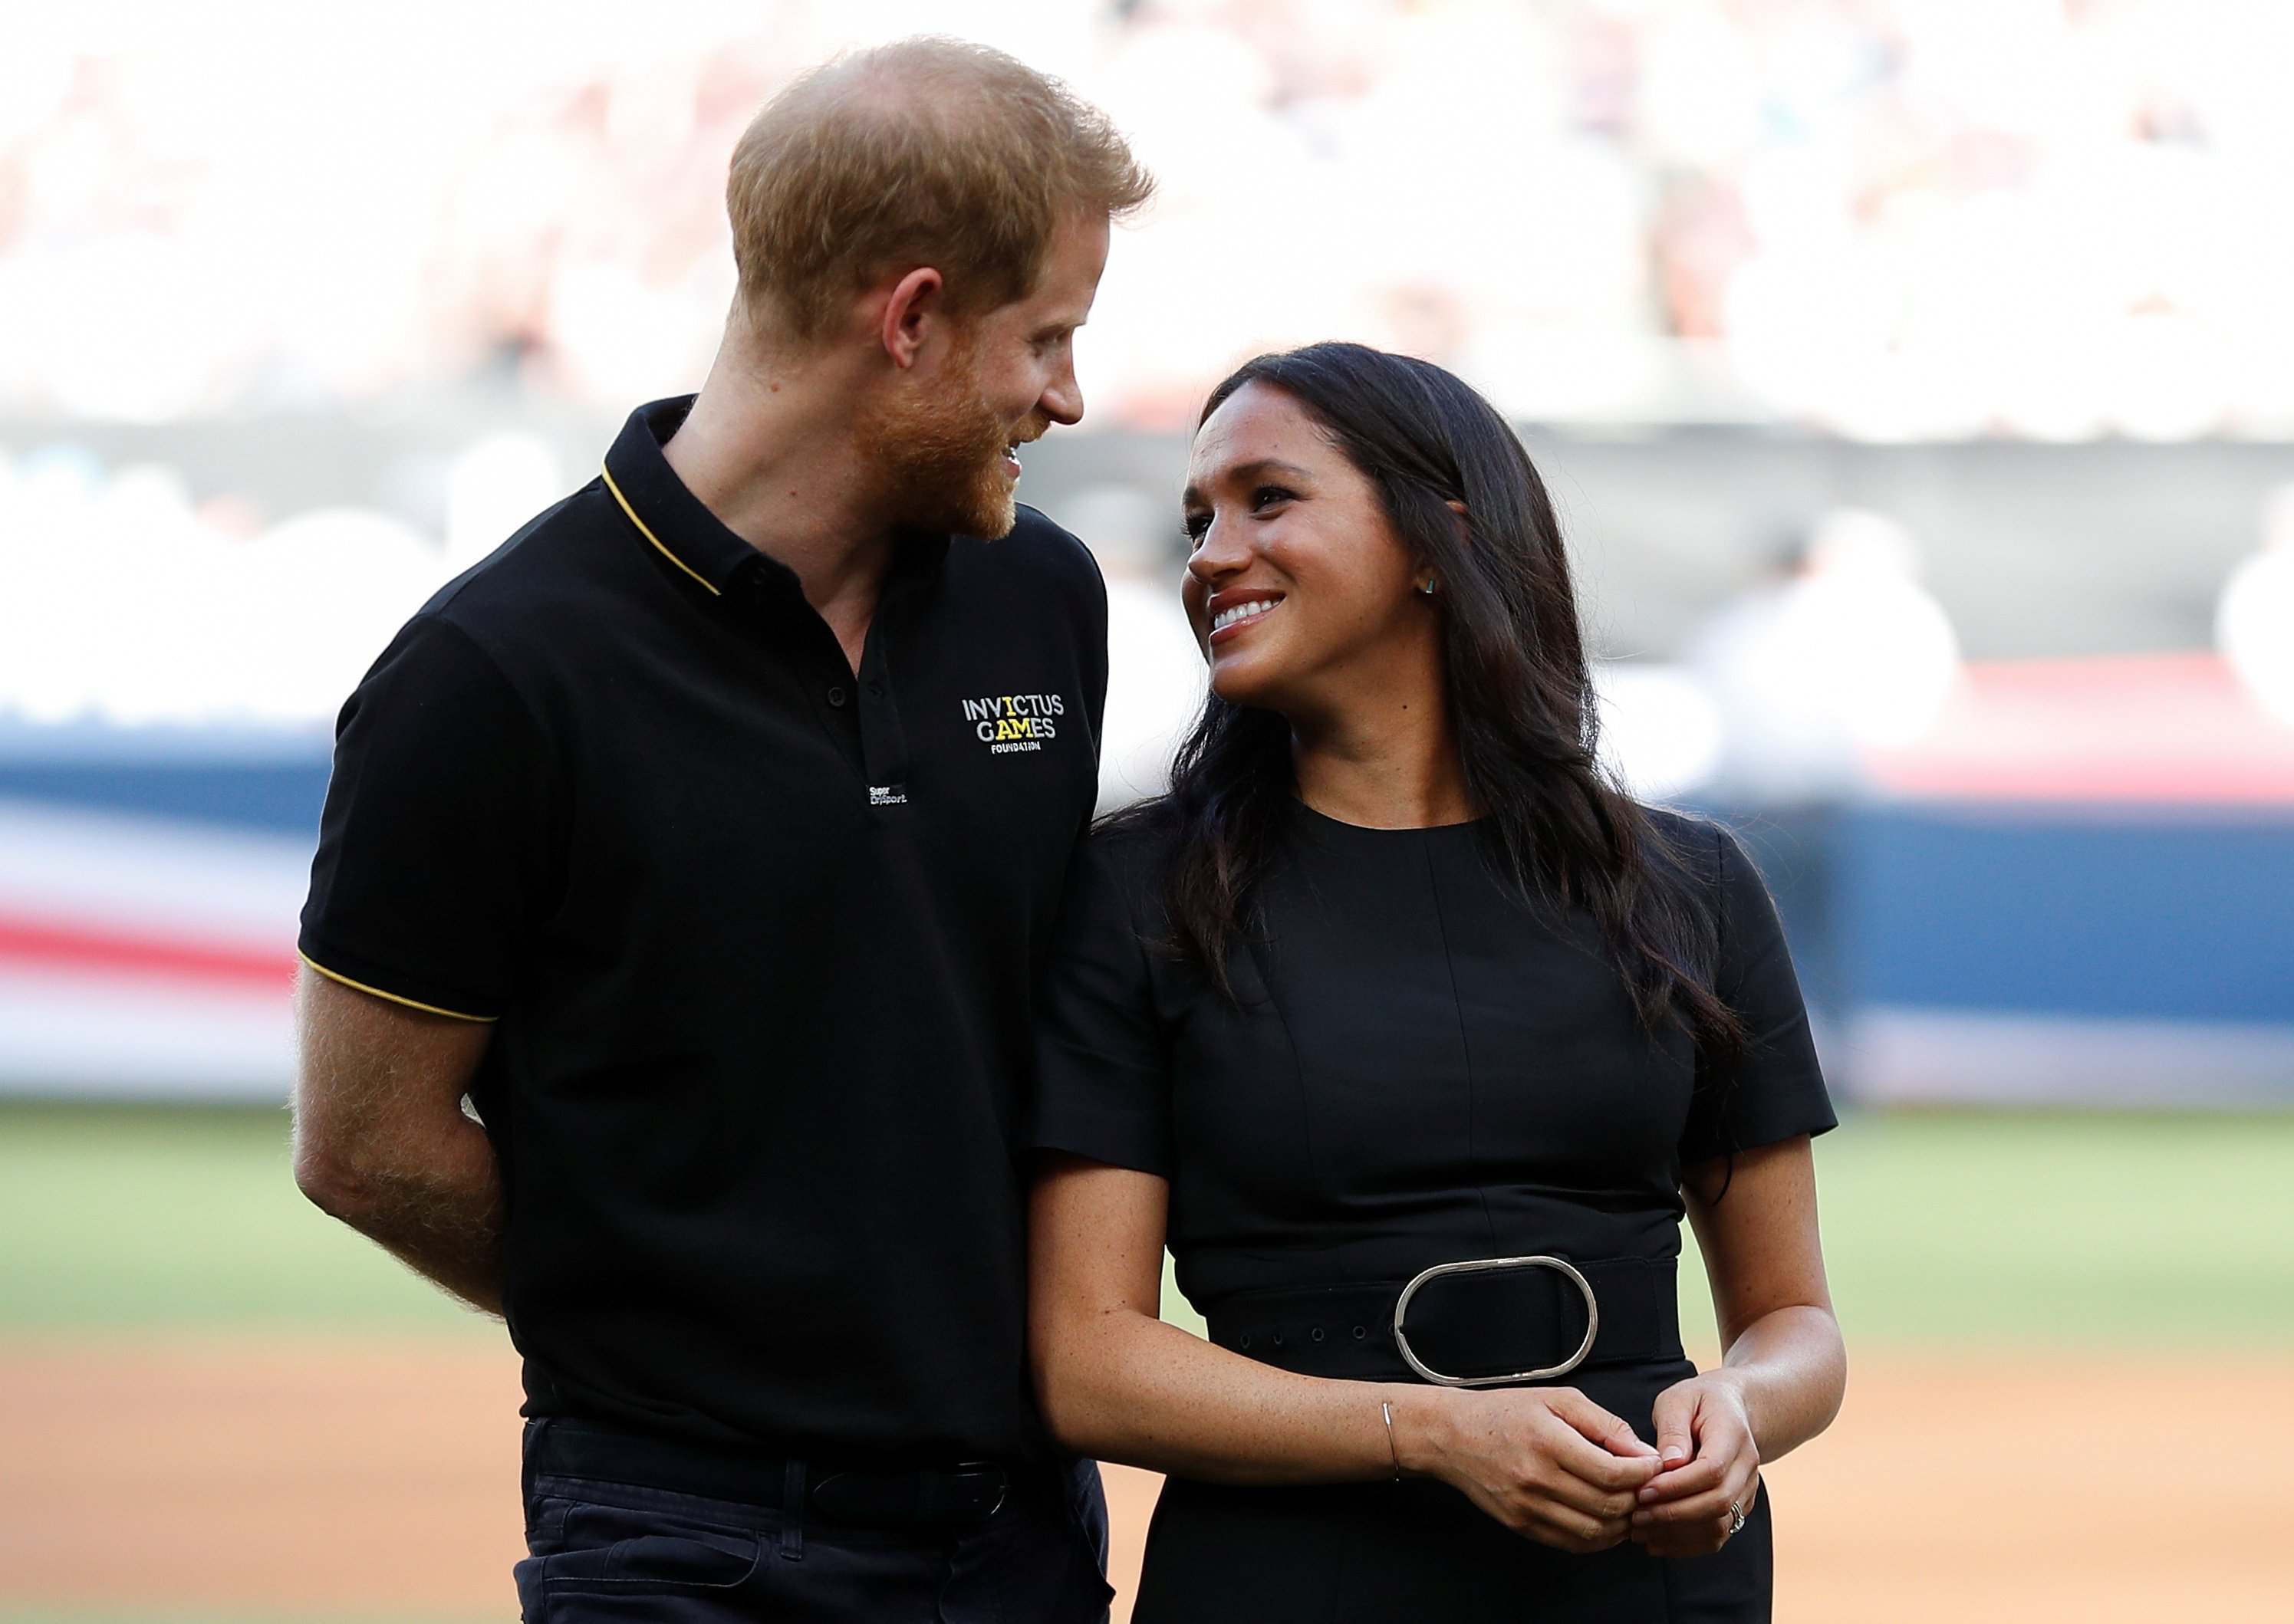 Prince Harry and Meghan Markle attend the Boston Red Sox vs New York Yankees baseball game at London Stadium on June 29, 2019 in London, England | Photo: Getty Images